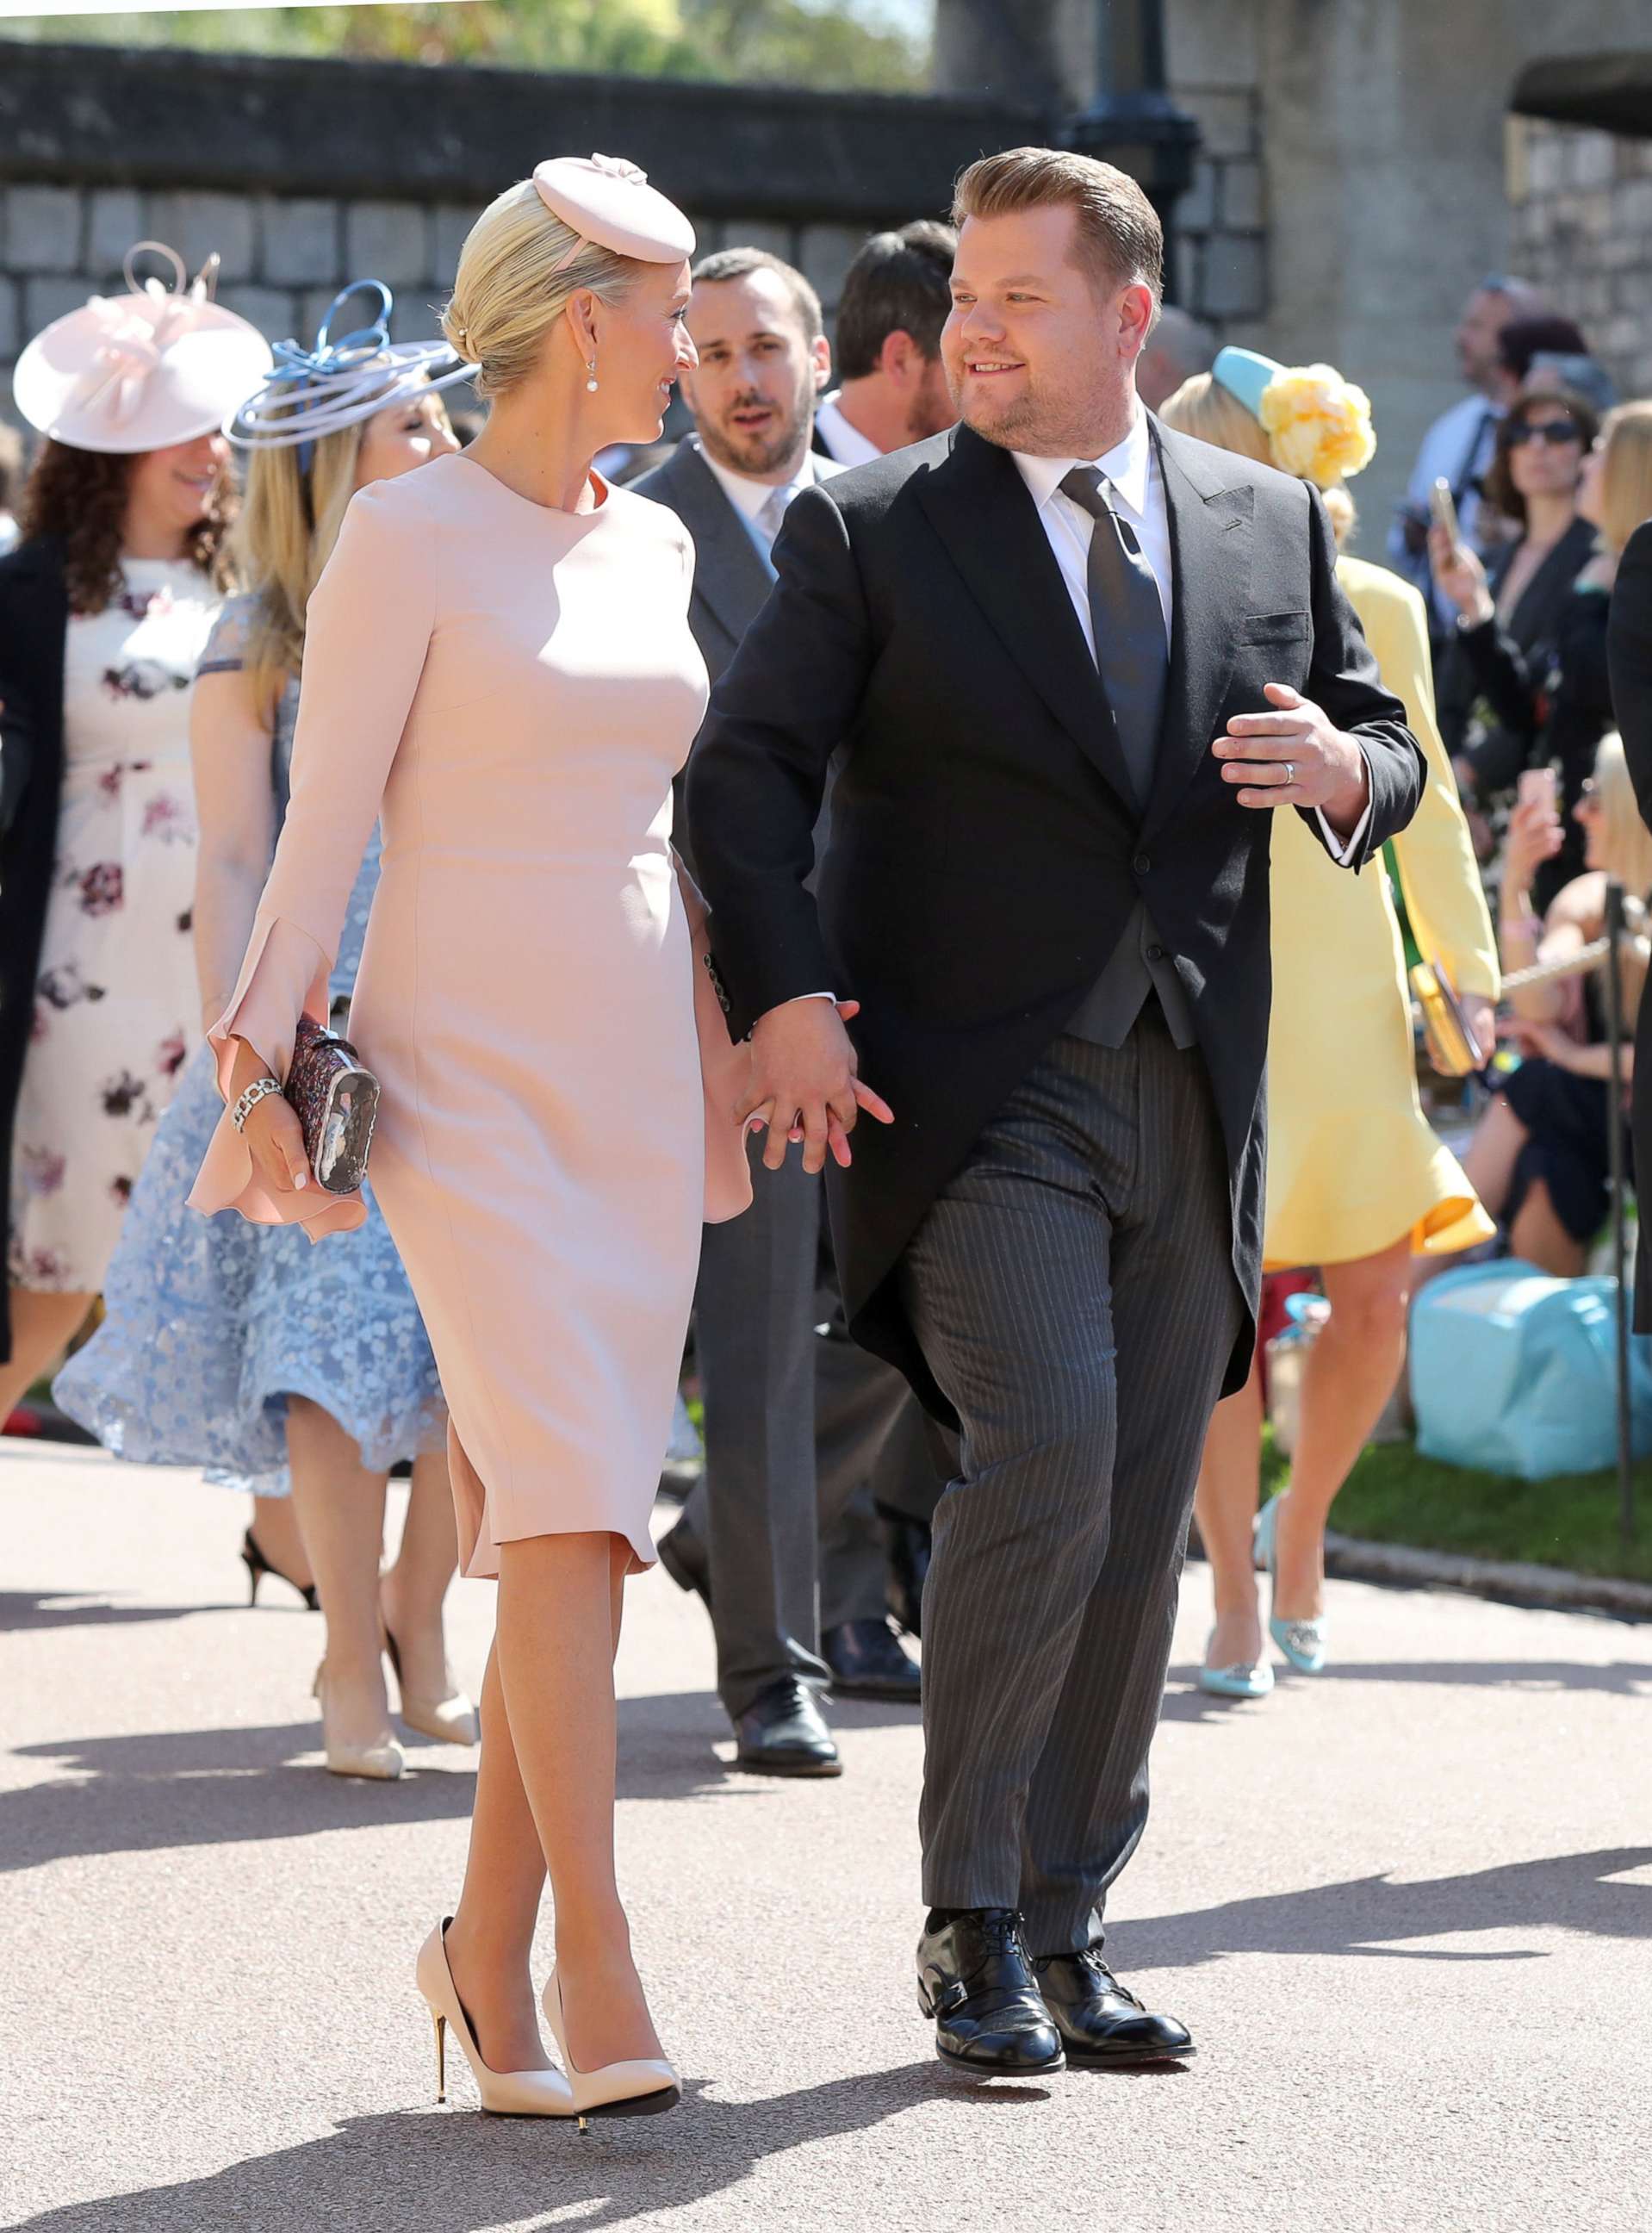 PHOTO: James Corden and Julia Carey arrive at St George's Chapel at Windsor Castle for the wedding of Meghan Markle and Prince Harry in Windsor, Britain, May 19, 2018.